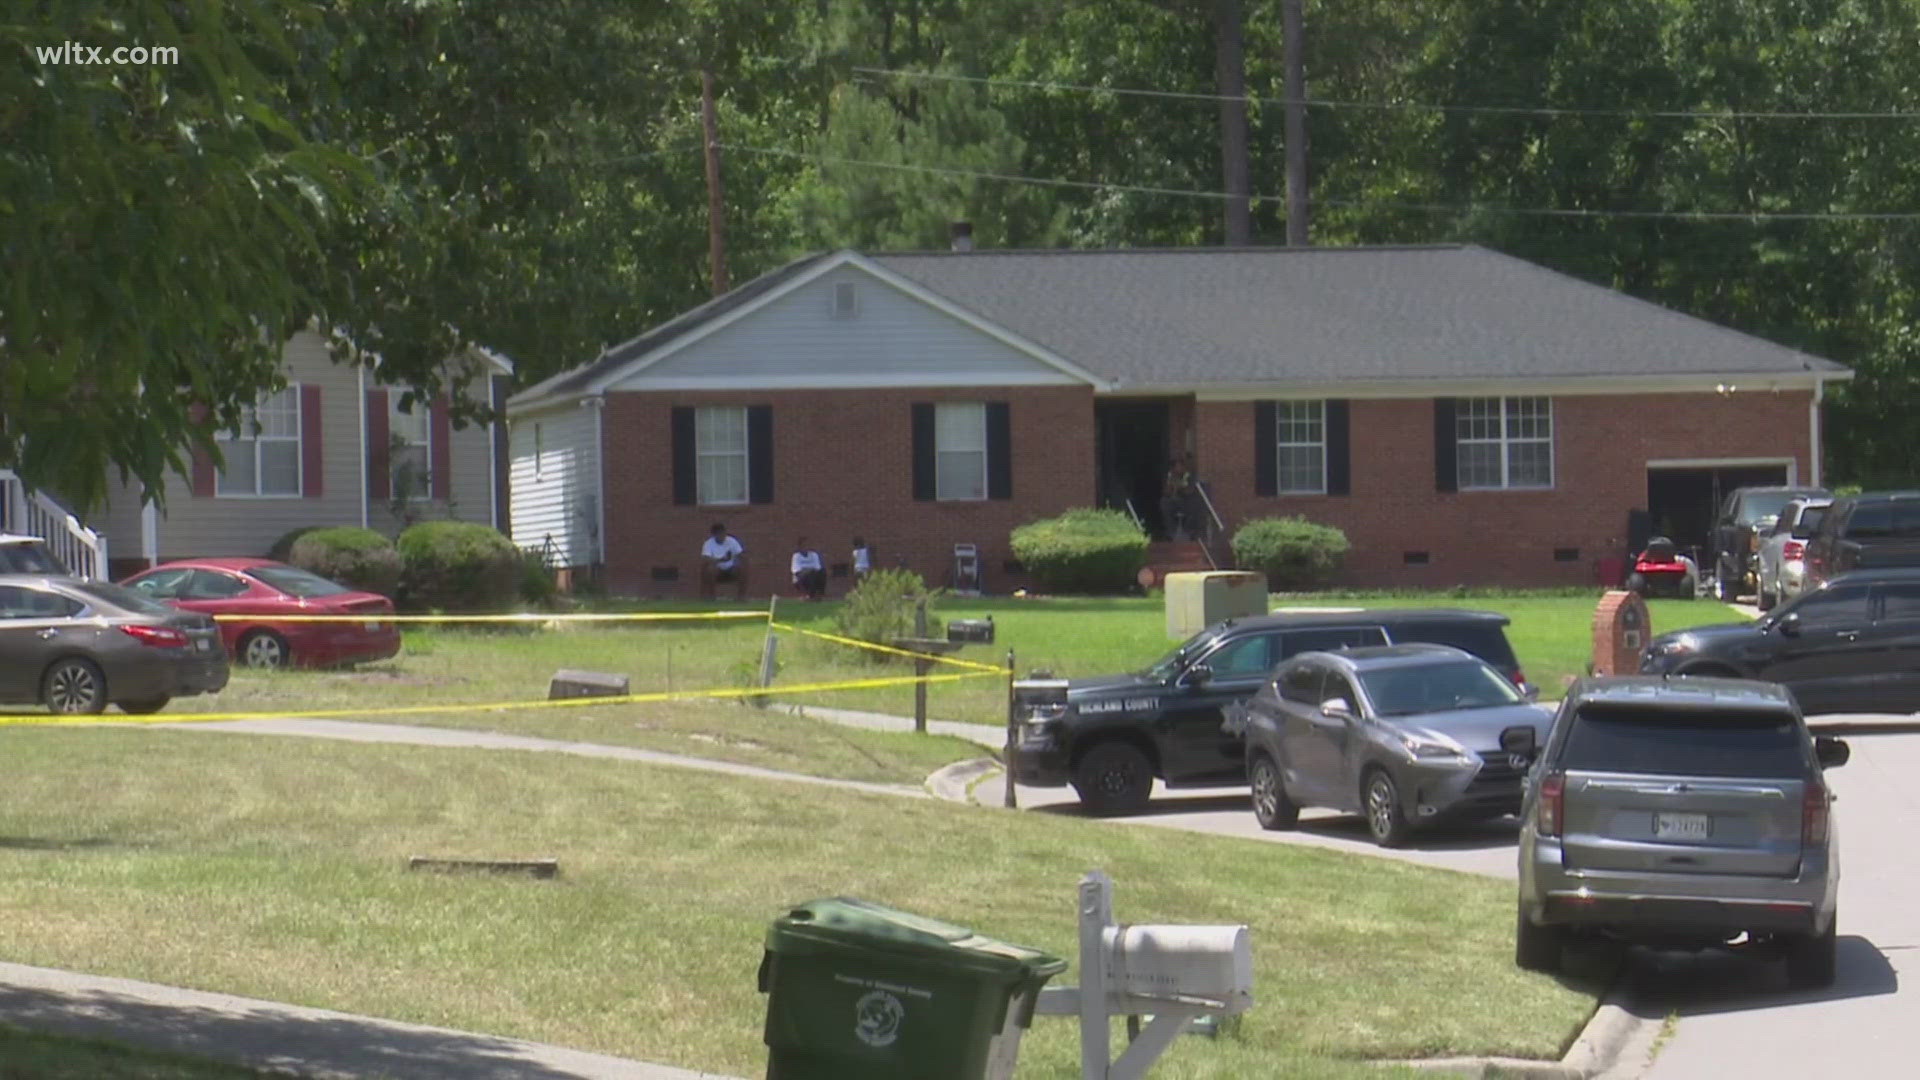 The Richland County Coroner's Office identified the victim as 31-year-old Chandreka  Graham of Columbia.